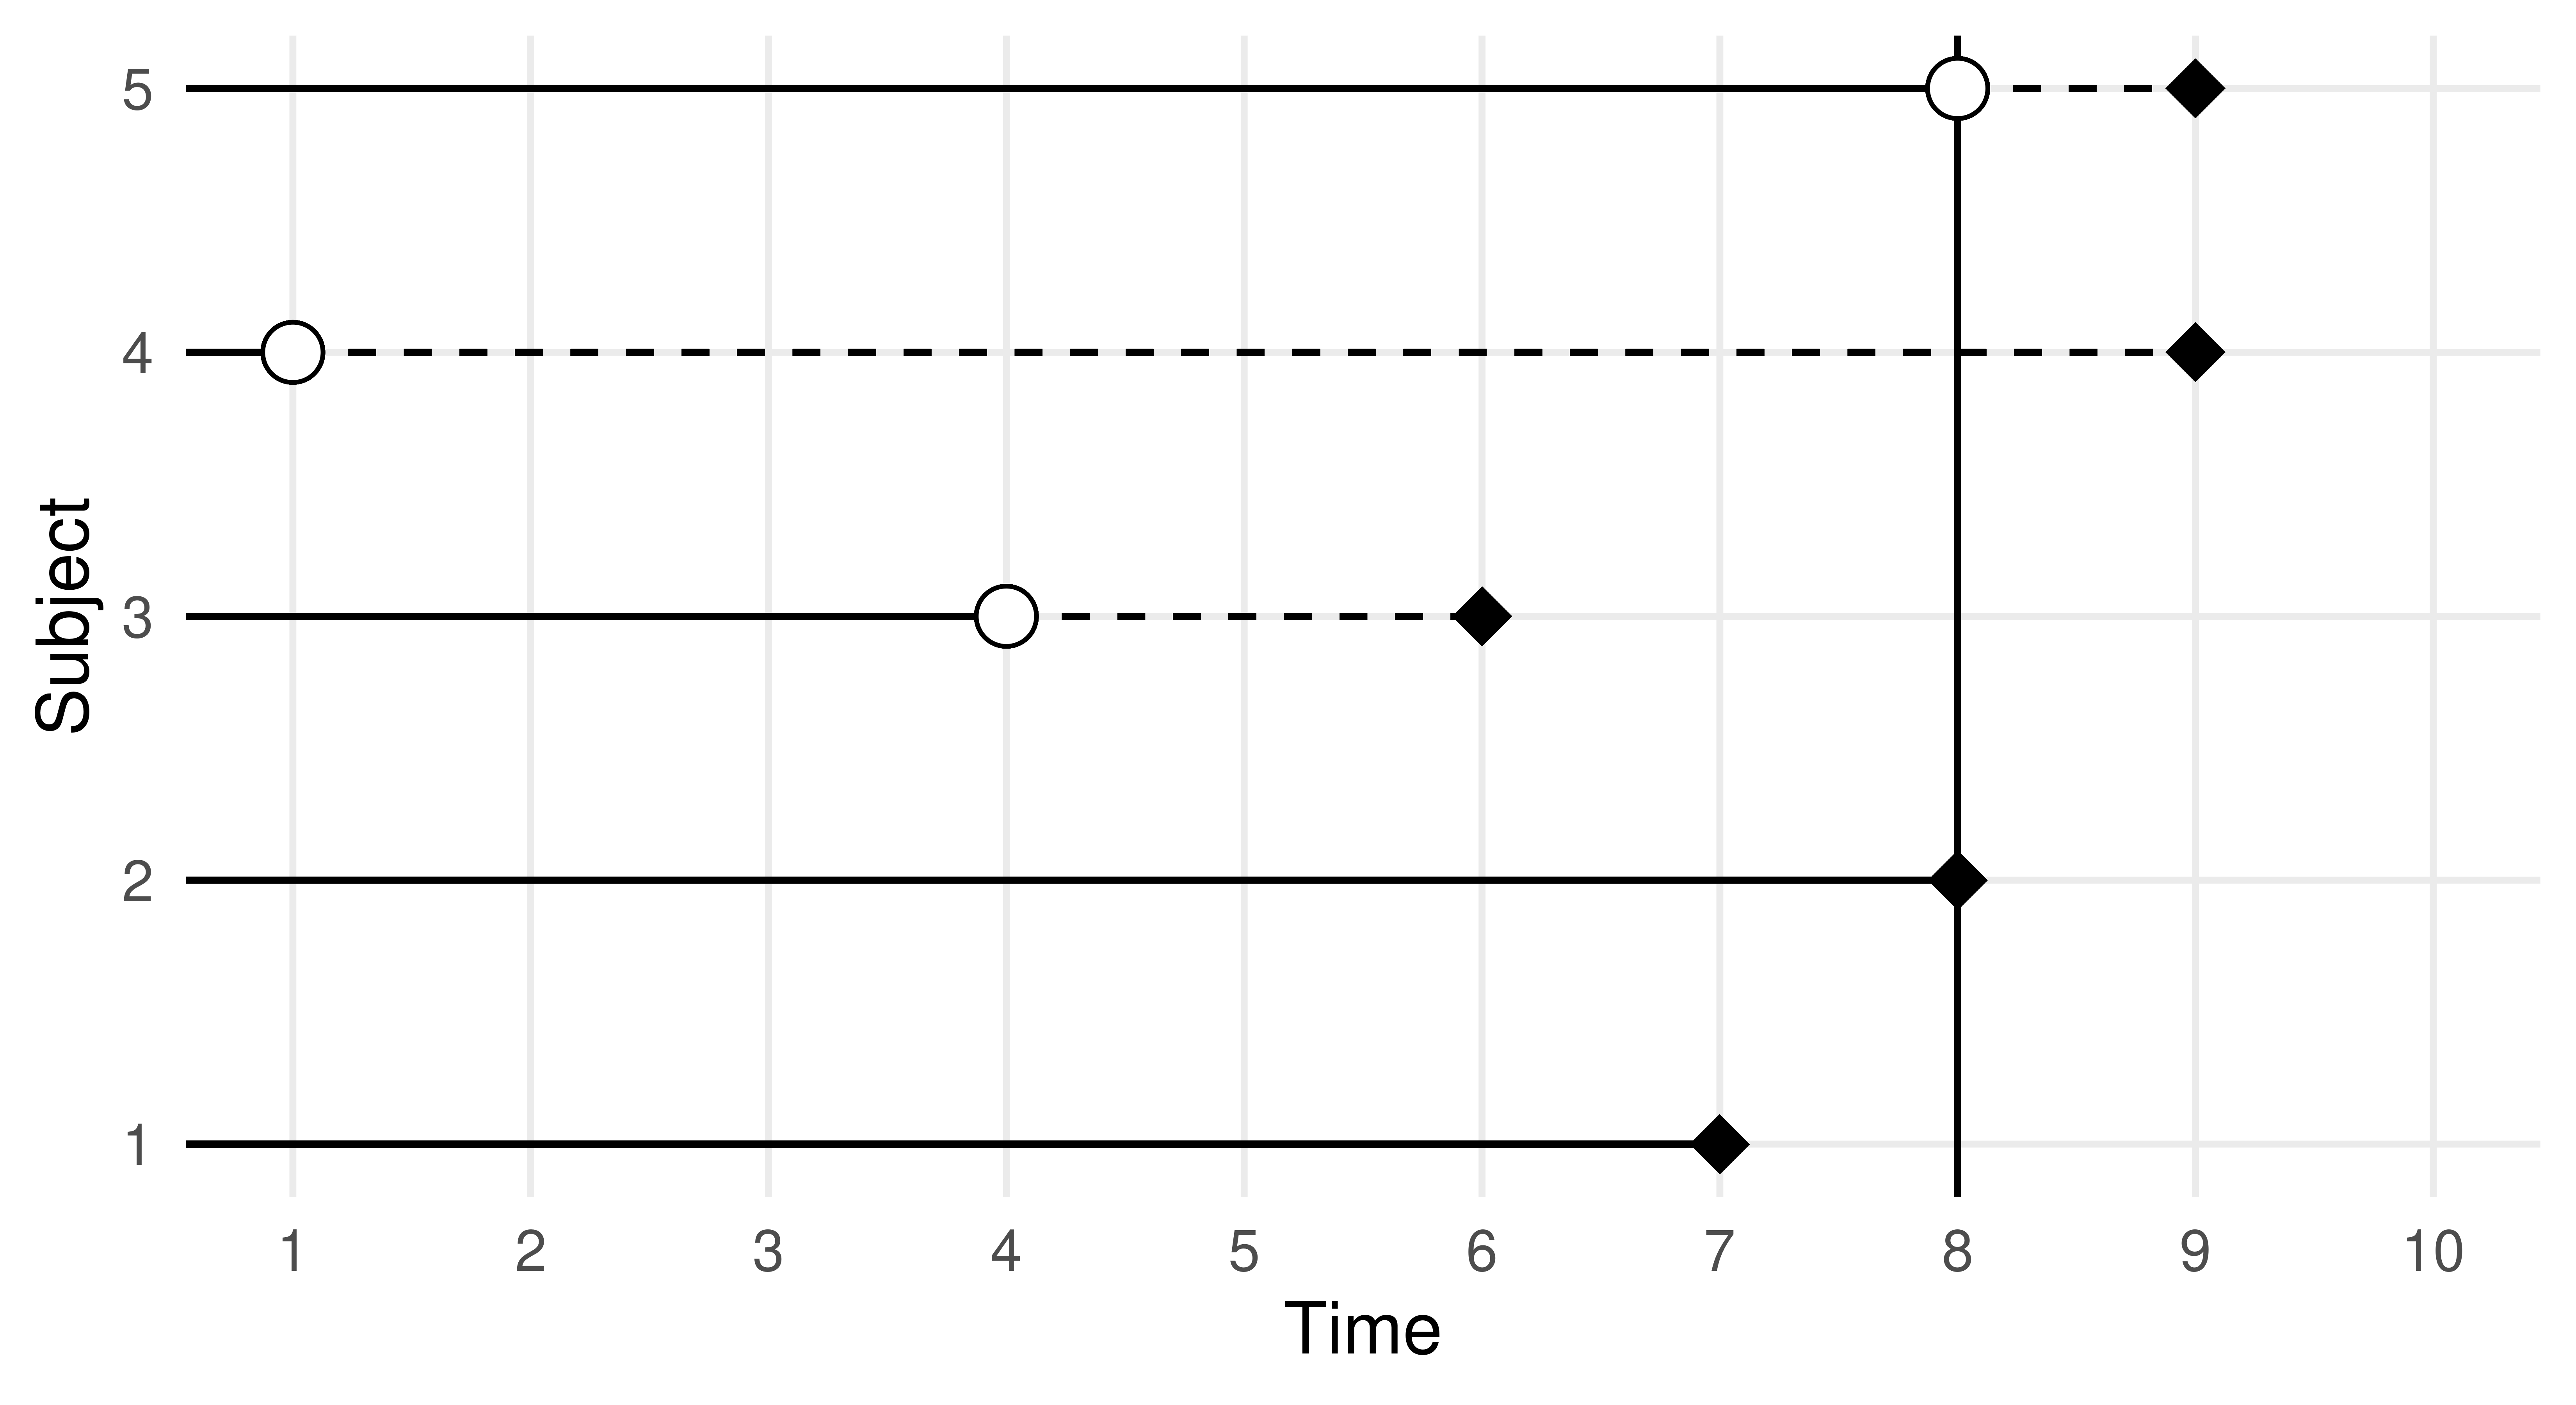 Figure shows give horizontal lines at 1,2,3,4,5 on the y-axis and a vertical line at 8 on the x-axis. Top line (subject 5) has a circle at x=8 and a diamond at x=9, second line (subject 4) has a circle at x=1 and a diamond at x=9, subject 3 has a circle at x=4 and a diamond at x=6, subject 2 has a diamond at x=8, and subject 1 has a diamond at x=7.